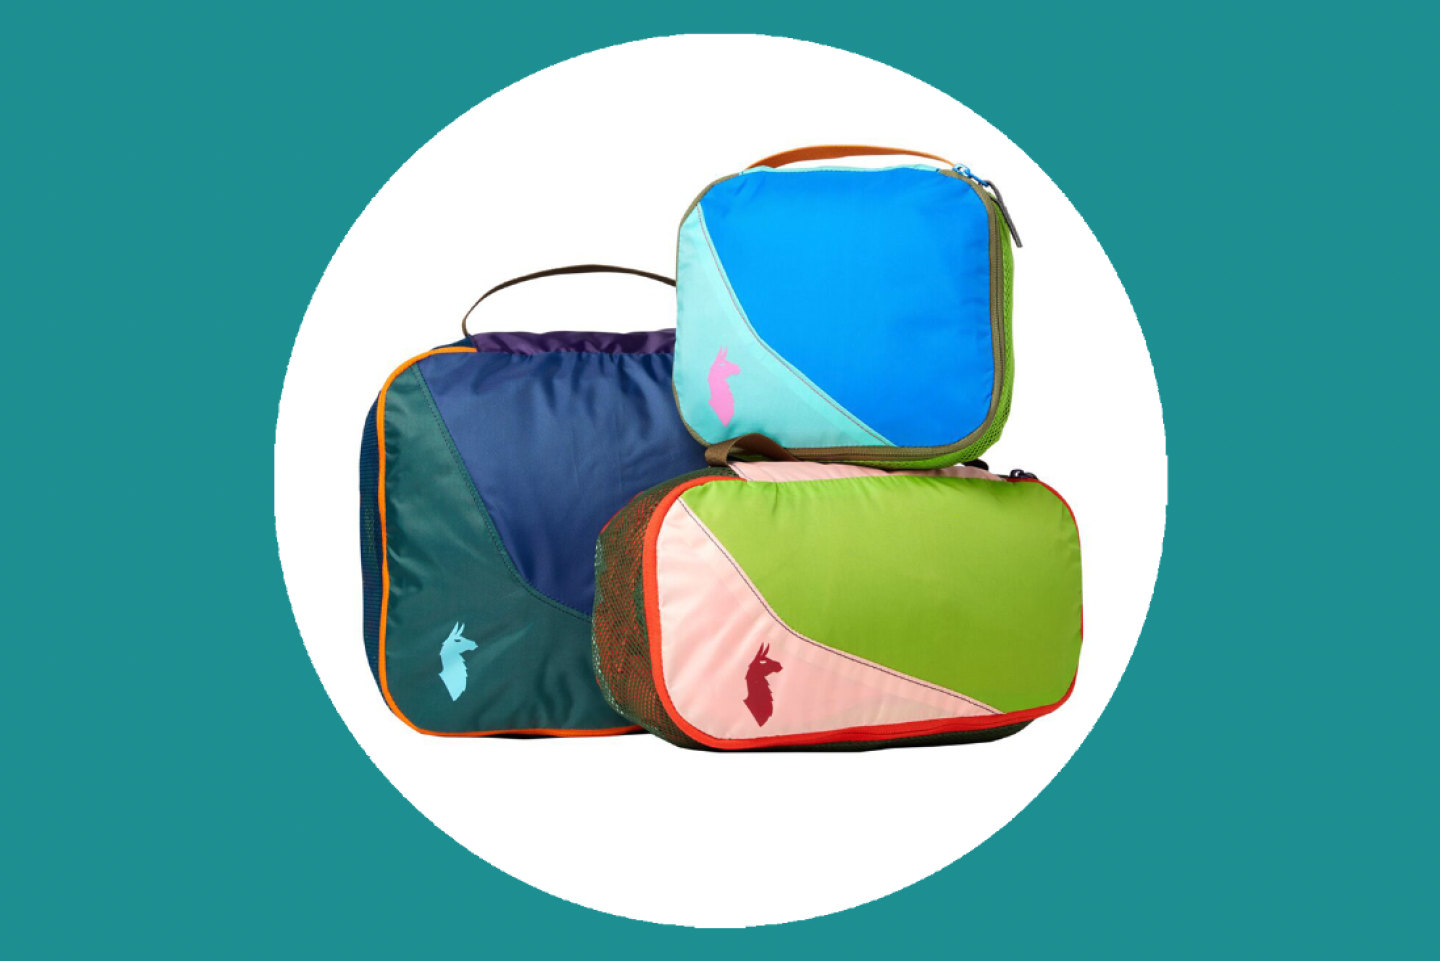 <h2>3. Use packing cubes</h2> <p>Whether you fold or roll your clothes, using packing cubes (like the ones from <a class="Link" href="https://go.skimresources.com?id=122560X1583085&xs=1&url=https%3A%2F%2Fwww.cotopaxi.com%2Fproducts%2Fcubos-travel-cube-bundle-del-dia%3Fvariant%3D39278225883197&xcust=PackingTips" rel="noopener nofollow sponsored">Cotopaxi</a> shown above) makes it easier to keep the contents of your luggage neat and well organized.</p> <p>In fact, both Joanna Teplin and Clea Shearer, the cofounders of <a class="Link" href="https://www.thehomeedit.com/" rel="noopener">The Home Edit</a> organizational empire, are packing cube devotees. But they use them in two very different ways: Shearer’s system involves sorting her belongings into cubes divided by categories, like daytime clothes, pajamas, and underwear and socks. Teplin, on the other hand, gives each outfit its own packing cubes—sometimes using three or more cubes per day—and sorts types of outfits into different colors of packing cubes, such as marble-patterned ones for pajamas and black ones for workout clothes.</p> <p>“Joanna and I do it differently, but if it works for her she should do it that way, what works for me, I should do it that way,” Shearer <a class="Link" href="https://www.afar.com/magazine/the-home-edits-top-packing-tips-for-organizing-your-suitcase" rel="noopener">told AFAR in 2021</a>. “Whatever system works for you is the system that is the correct one.”</p> <p><b>>> Read more: </b><a class="Link" href="https://www.afar.com/magazine/the-best-packing-cubes-for-every-budget" rel="noopener"><b>The 9 Best Packing Cubes for Travel</b></a></p> <h2>4. Never use one big bag for toiletries</h2> <p>Instead of packing one large <a class="Link" href="https://www.afar.com/magazine/the-best-toiletry-bags-and-dopp-kits-for-travel" rel="noopener">dopp kit</a>, Shearer and Teplin also recommend separating your hair products, skincare products, and cosmetics into different toiletry bags so you don’t have to dig through your makeup just to find your floss at night. Don’t want to bring multiple bags? Use a kit that comes with separate compartments, like <a class="Link" href="https://go.skimresources.com?id=122560X1583085&xs=1&url=https%3A%2F%2Fwww.calpaktravel.com%2Fproducts%2Fsmall-clear-cosmetics-case%2Fblack&xcust=PackingTips" rel="noopener nofollow sponsored">Calpak’s Clear Cosmetics Cases</a>, so you can use one side for hair products and the other side for skin and dental items.</p>